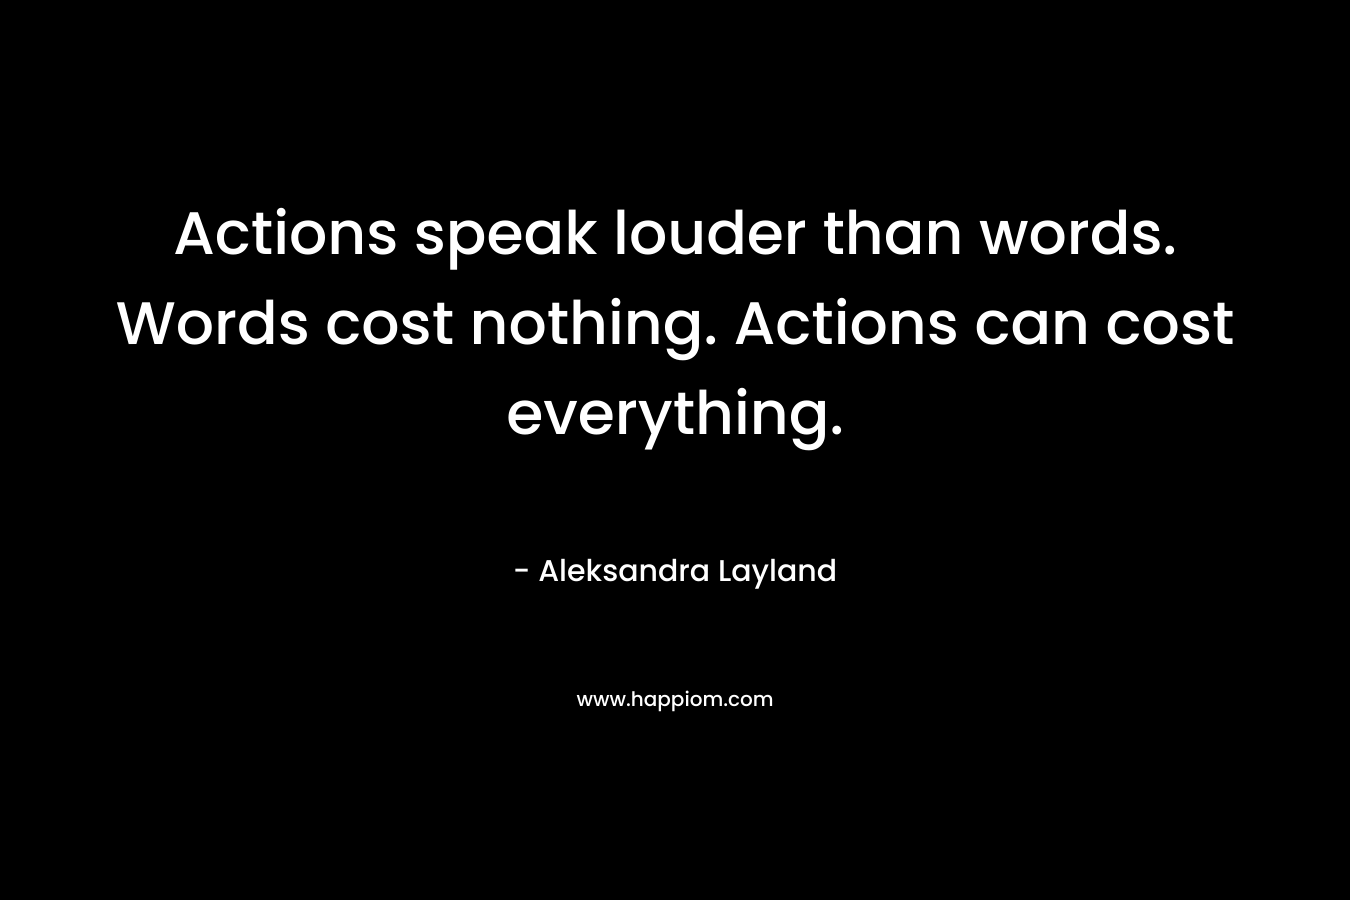 Actions speak louder than words. Words cost nothing. Actions can cost everything. – Aleksandra Layland